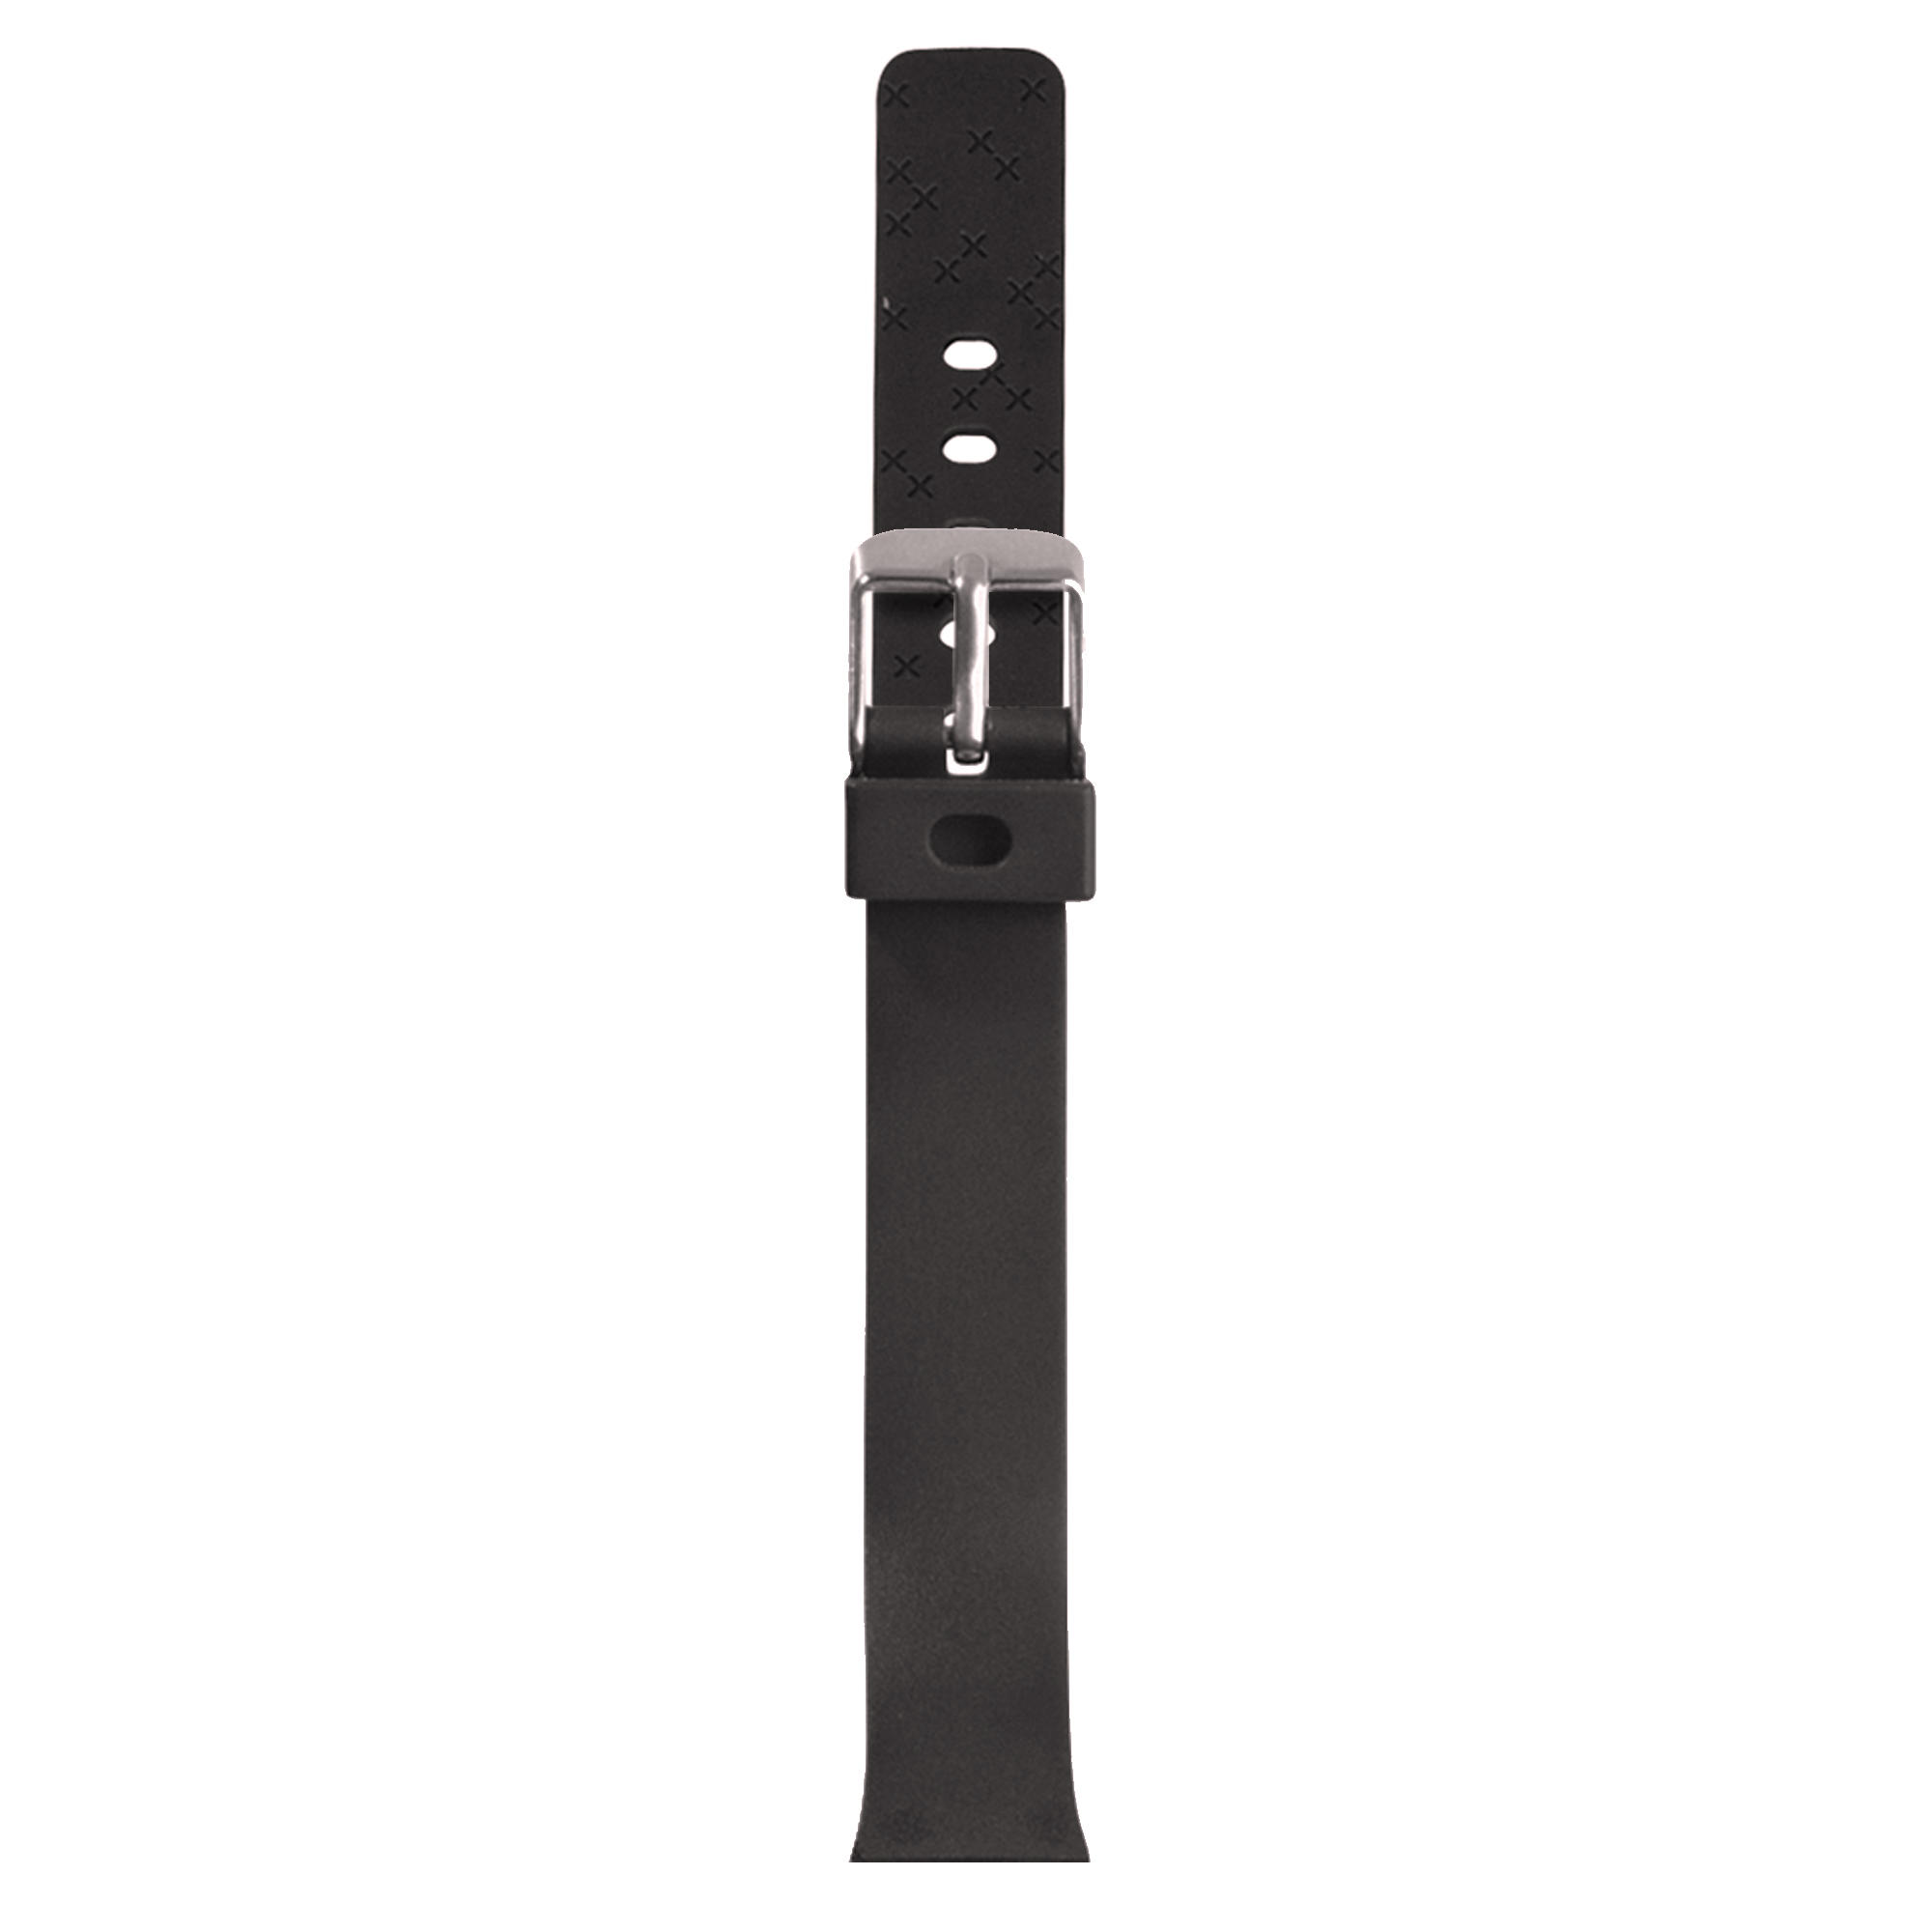 WATCH STRAP COMPATIBLE WITH W500S AND A300S - BLACK 1/2